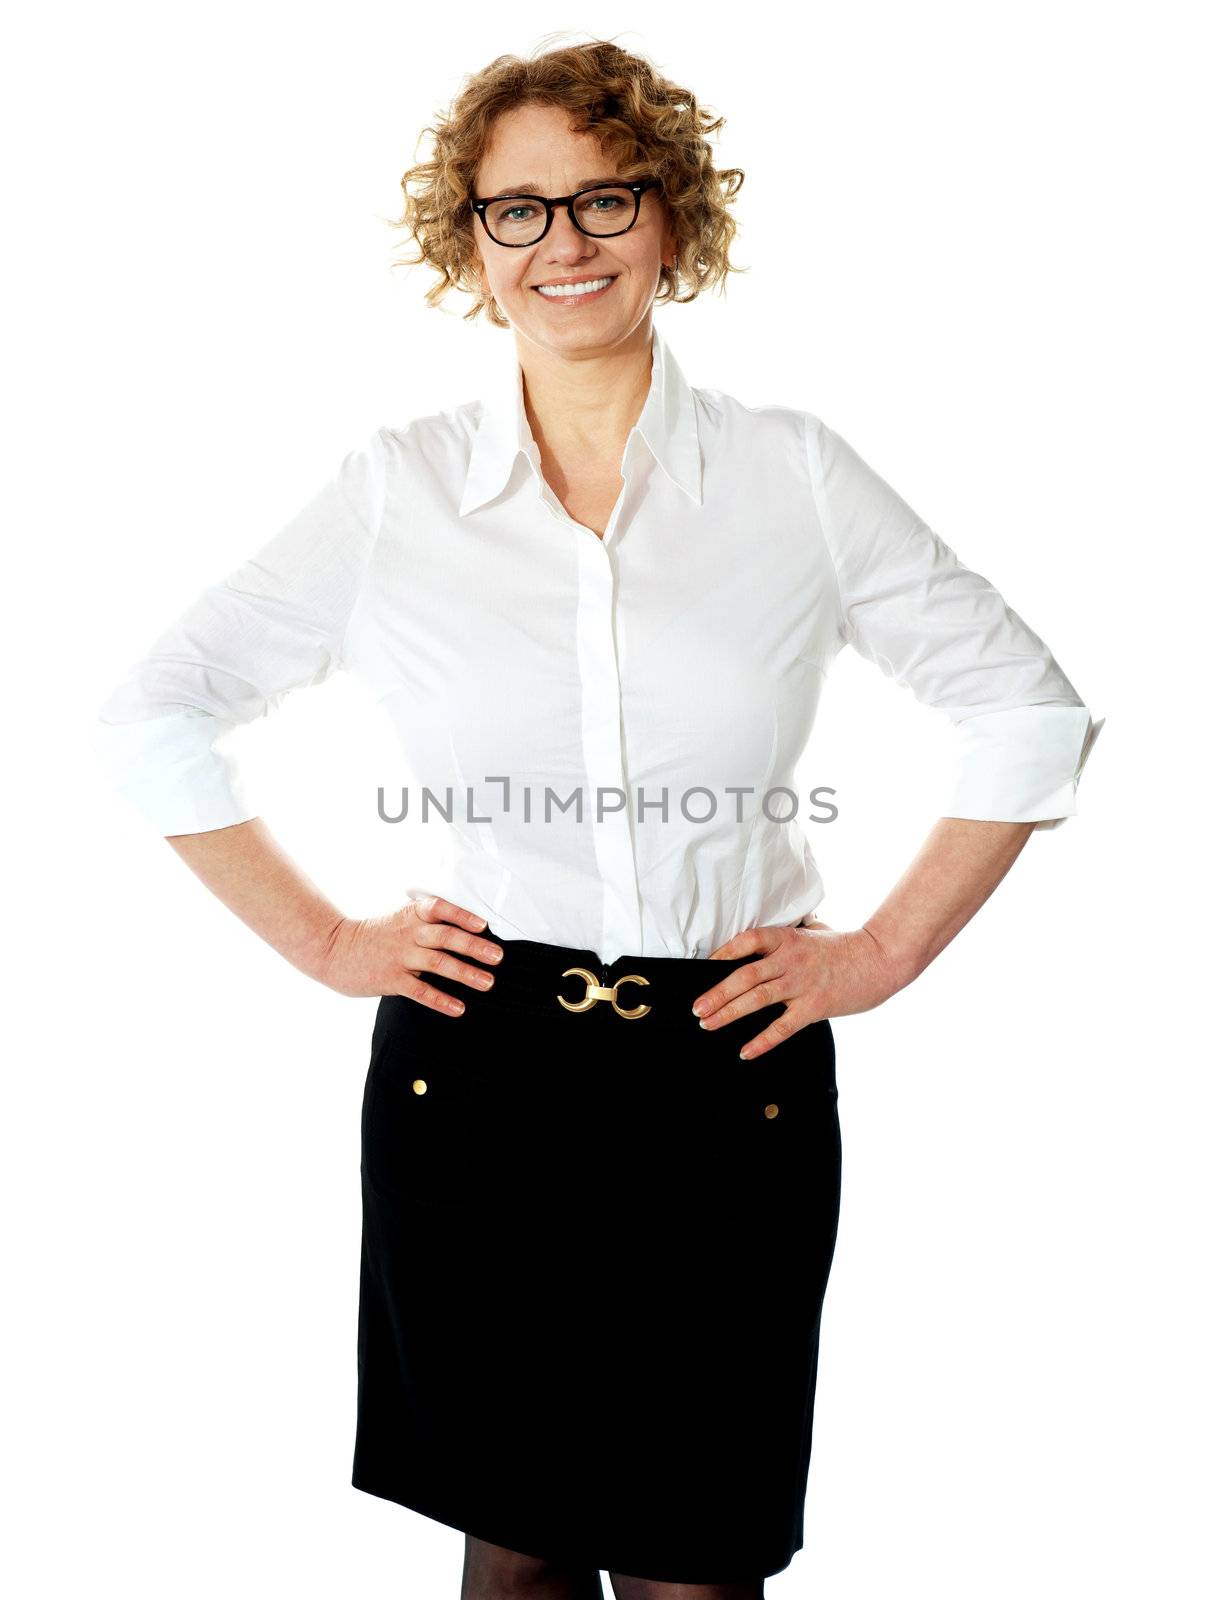 Female executive posing with hands on her waist, smiling at camera